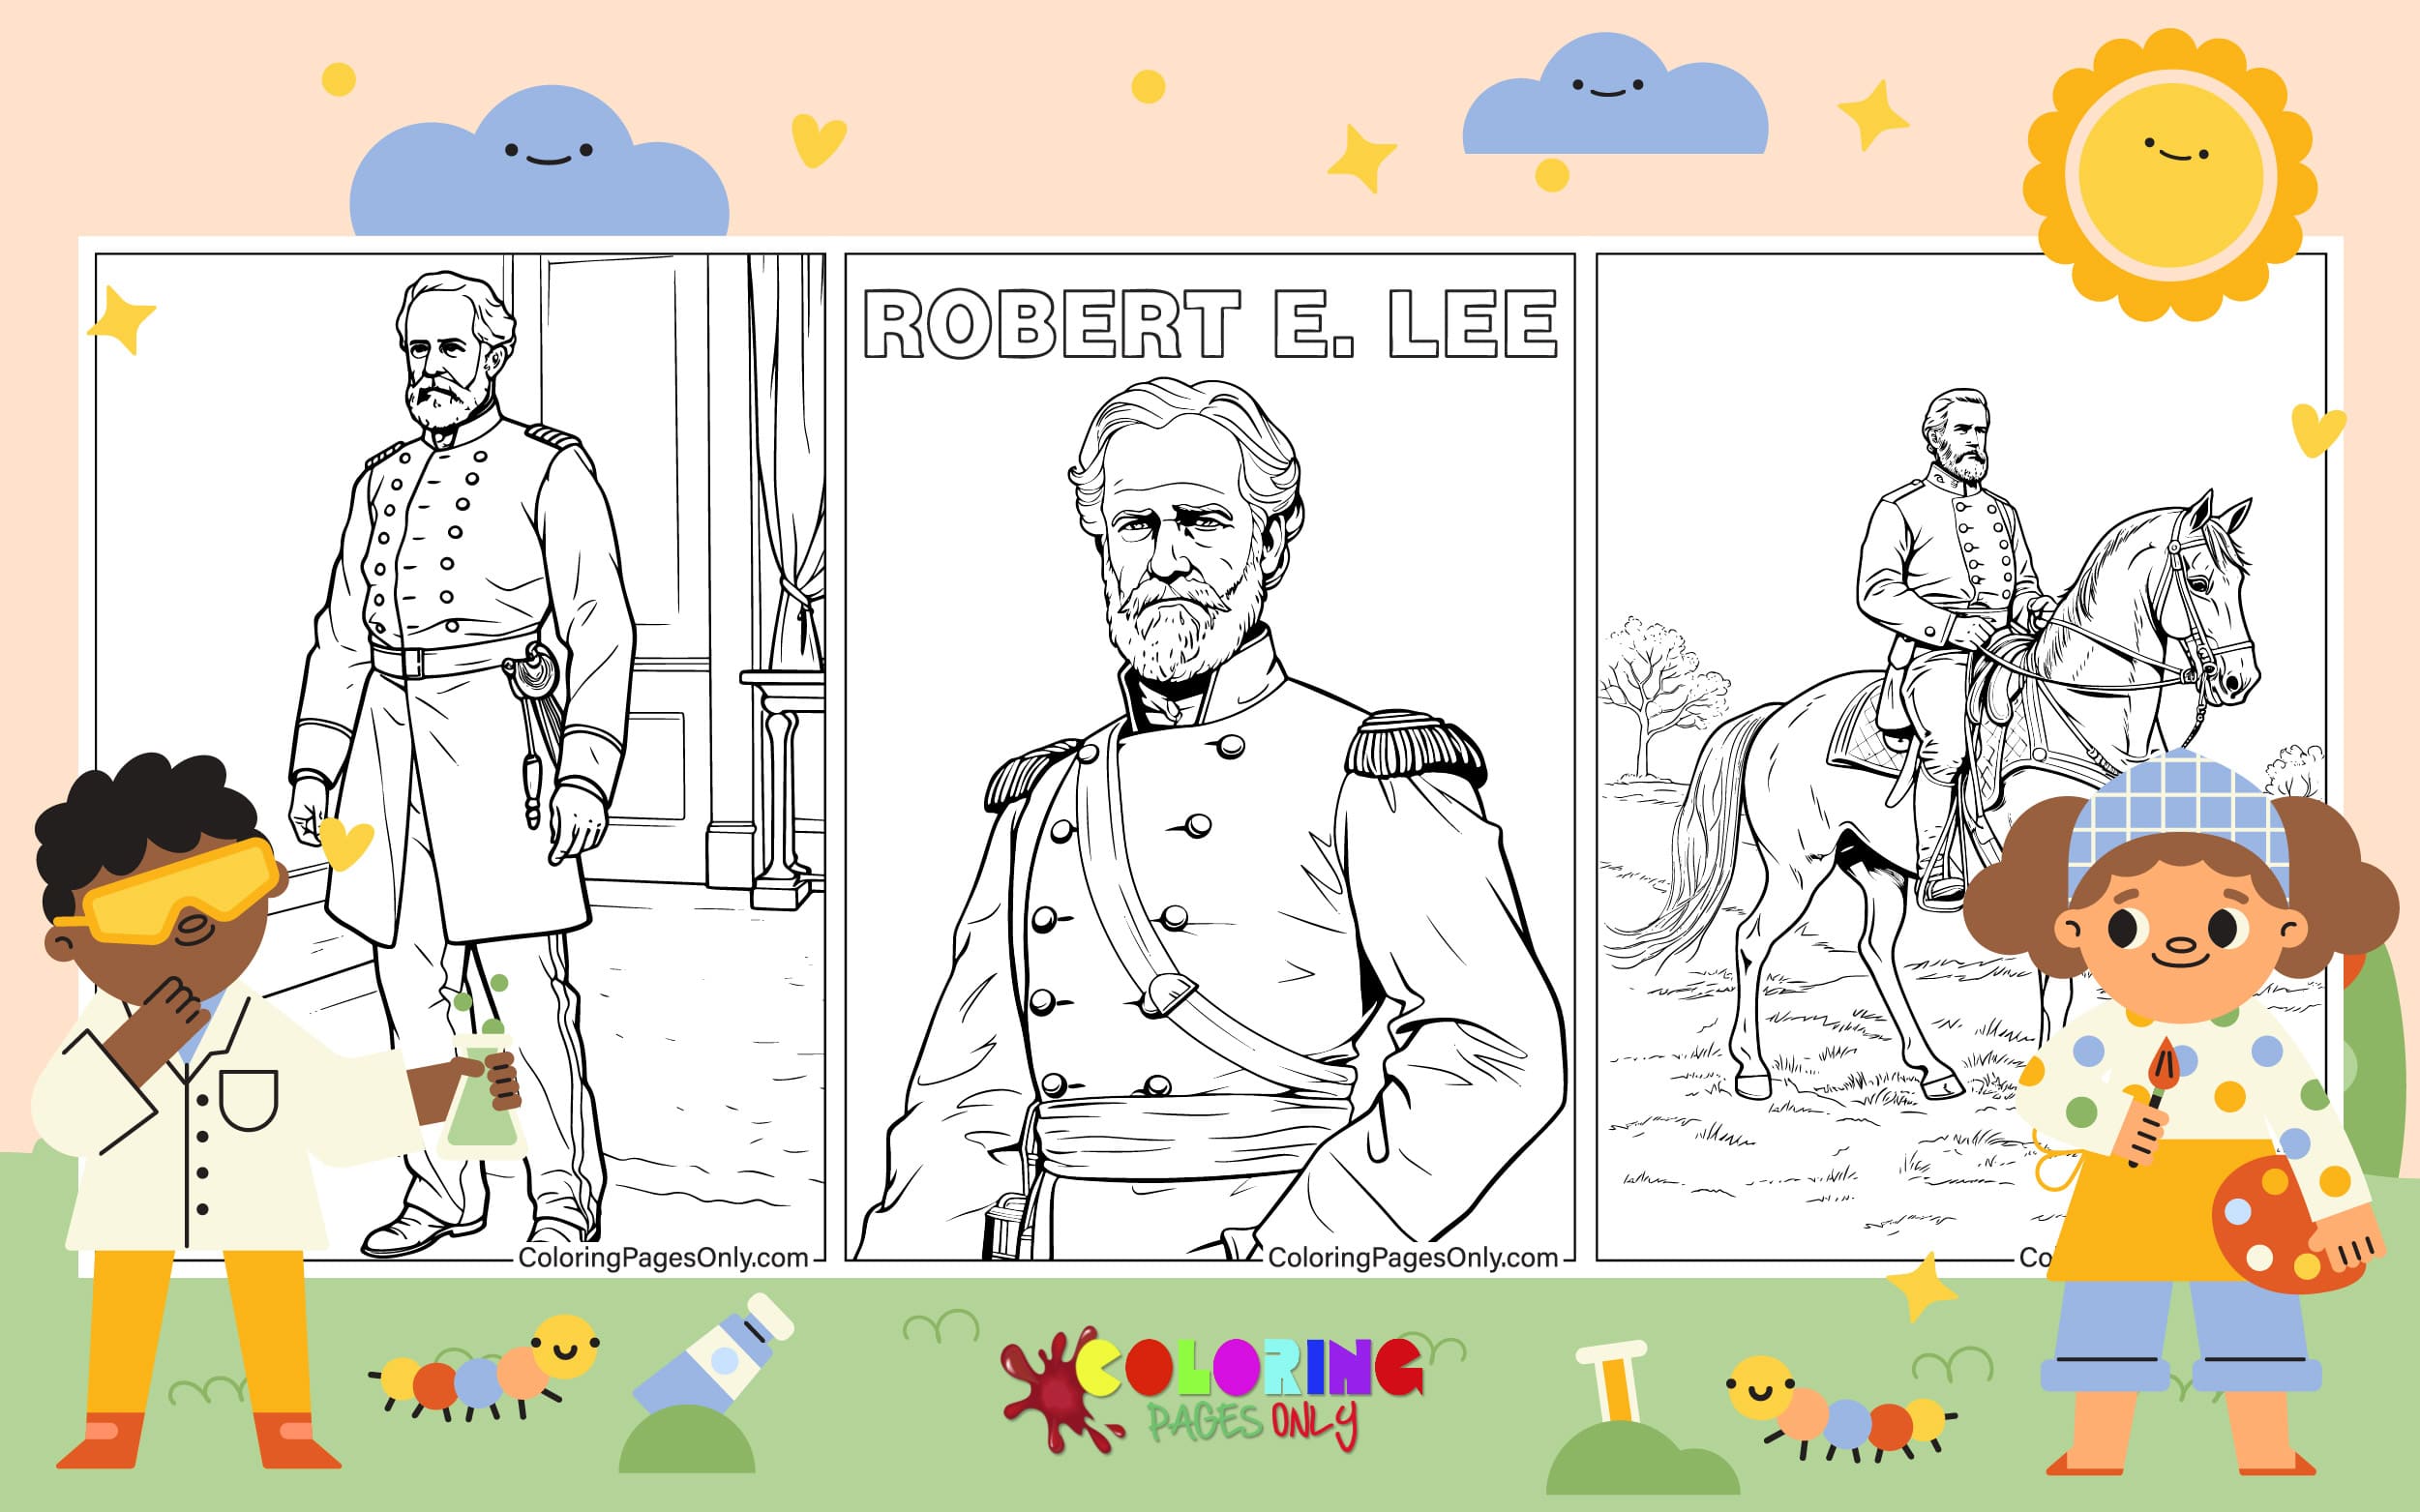 Robert e lee coloring pages